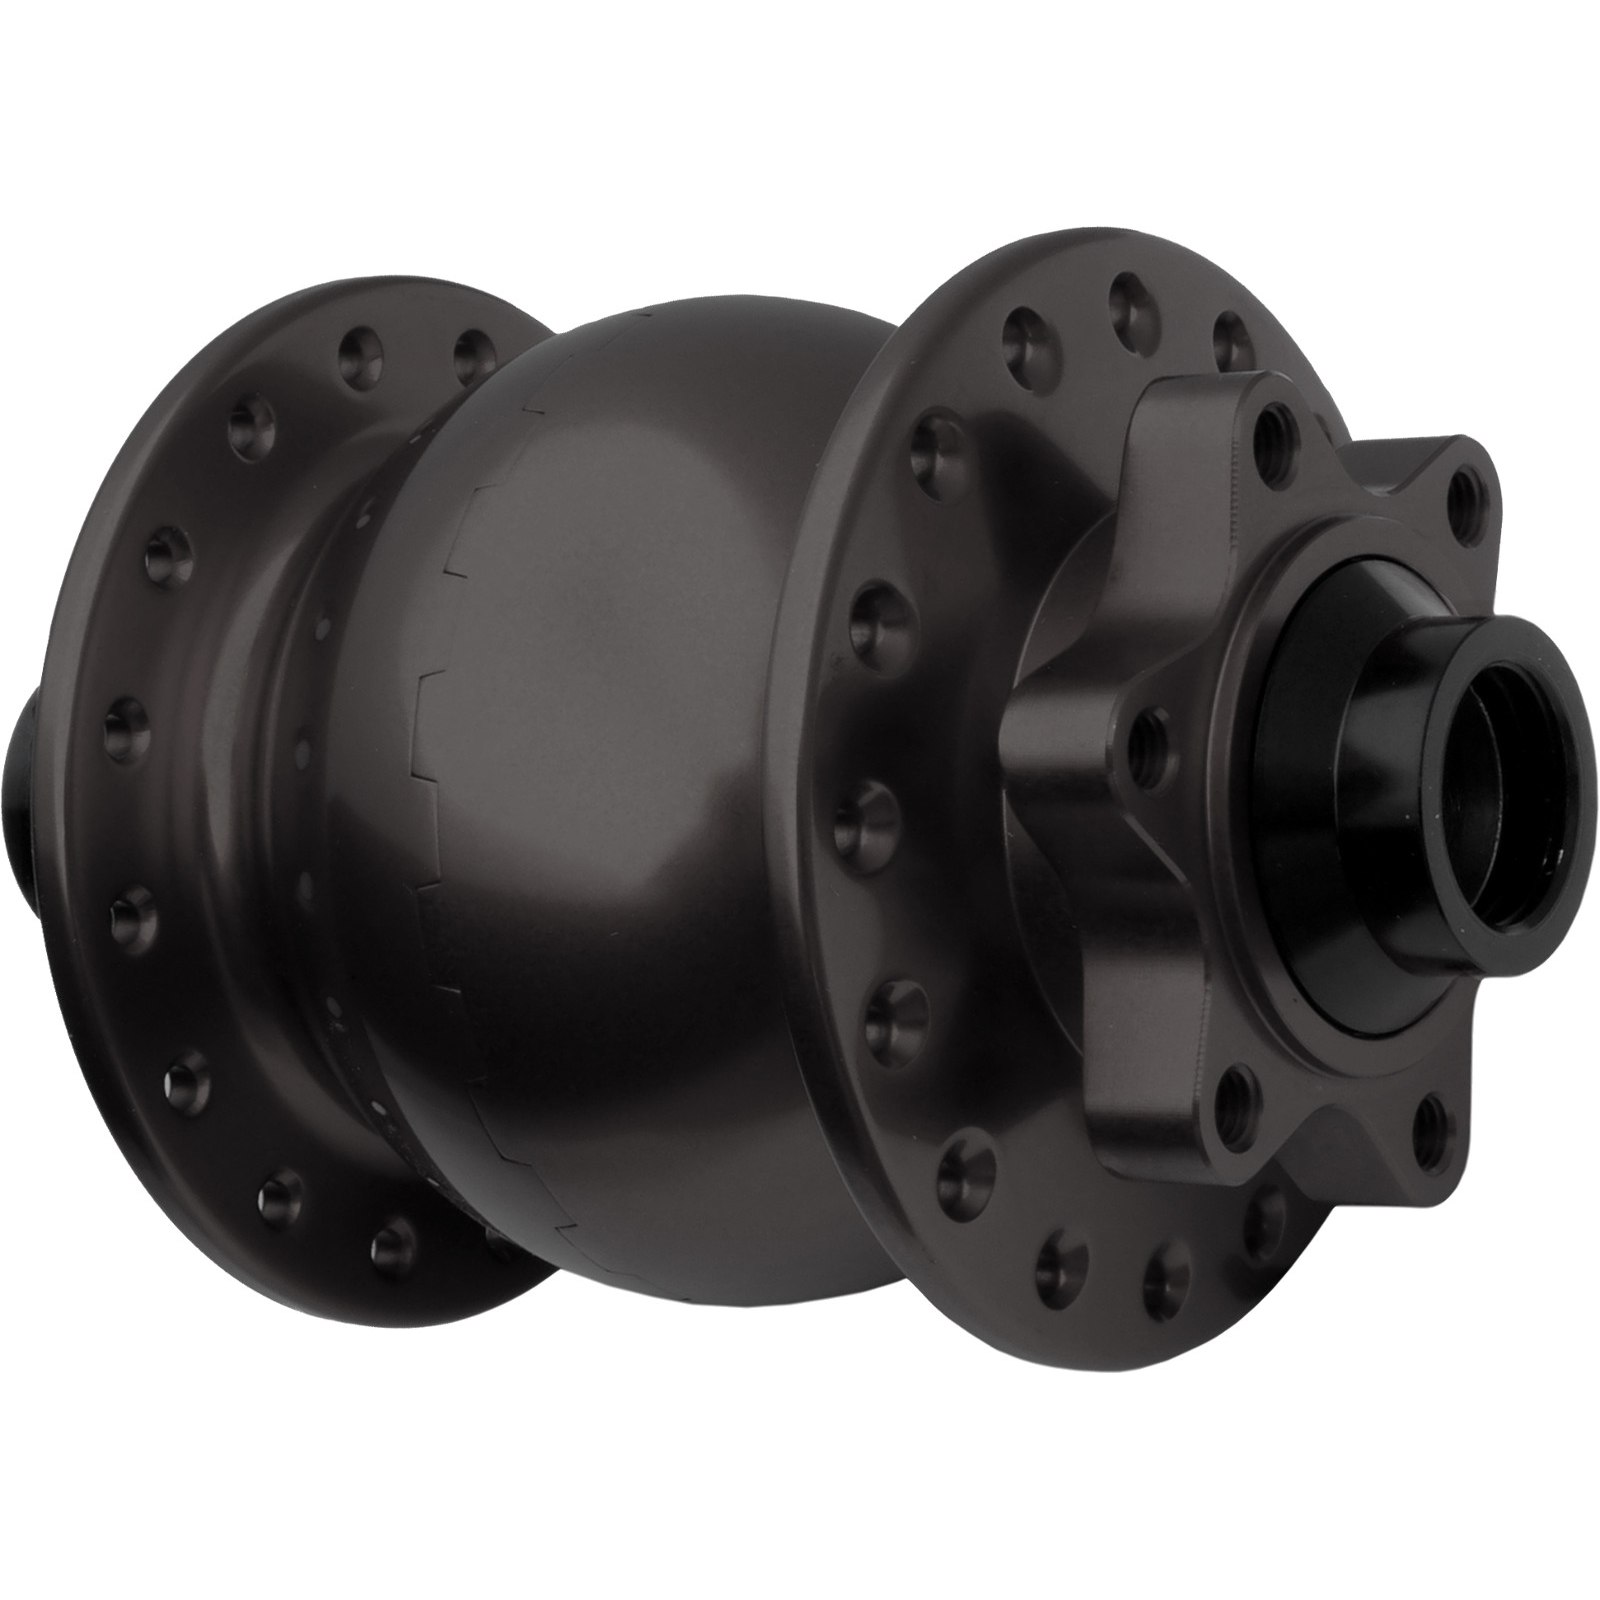 Picture of SON 28 15 110 Hub Dynamo - 6-Bolt - 15x110mm Boost - black anodized